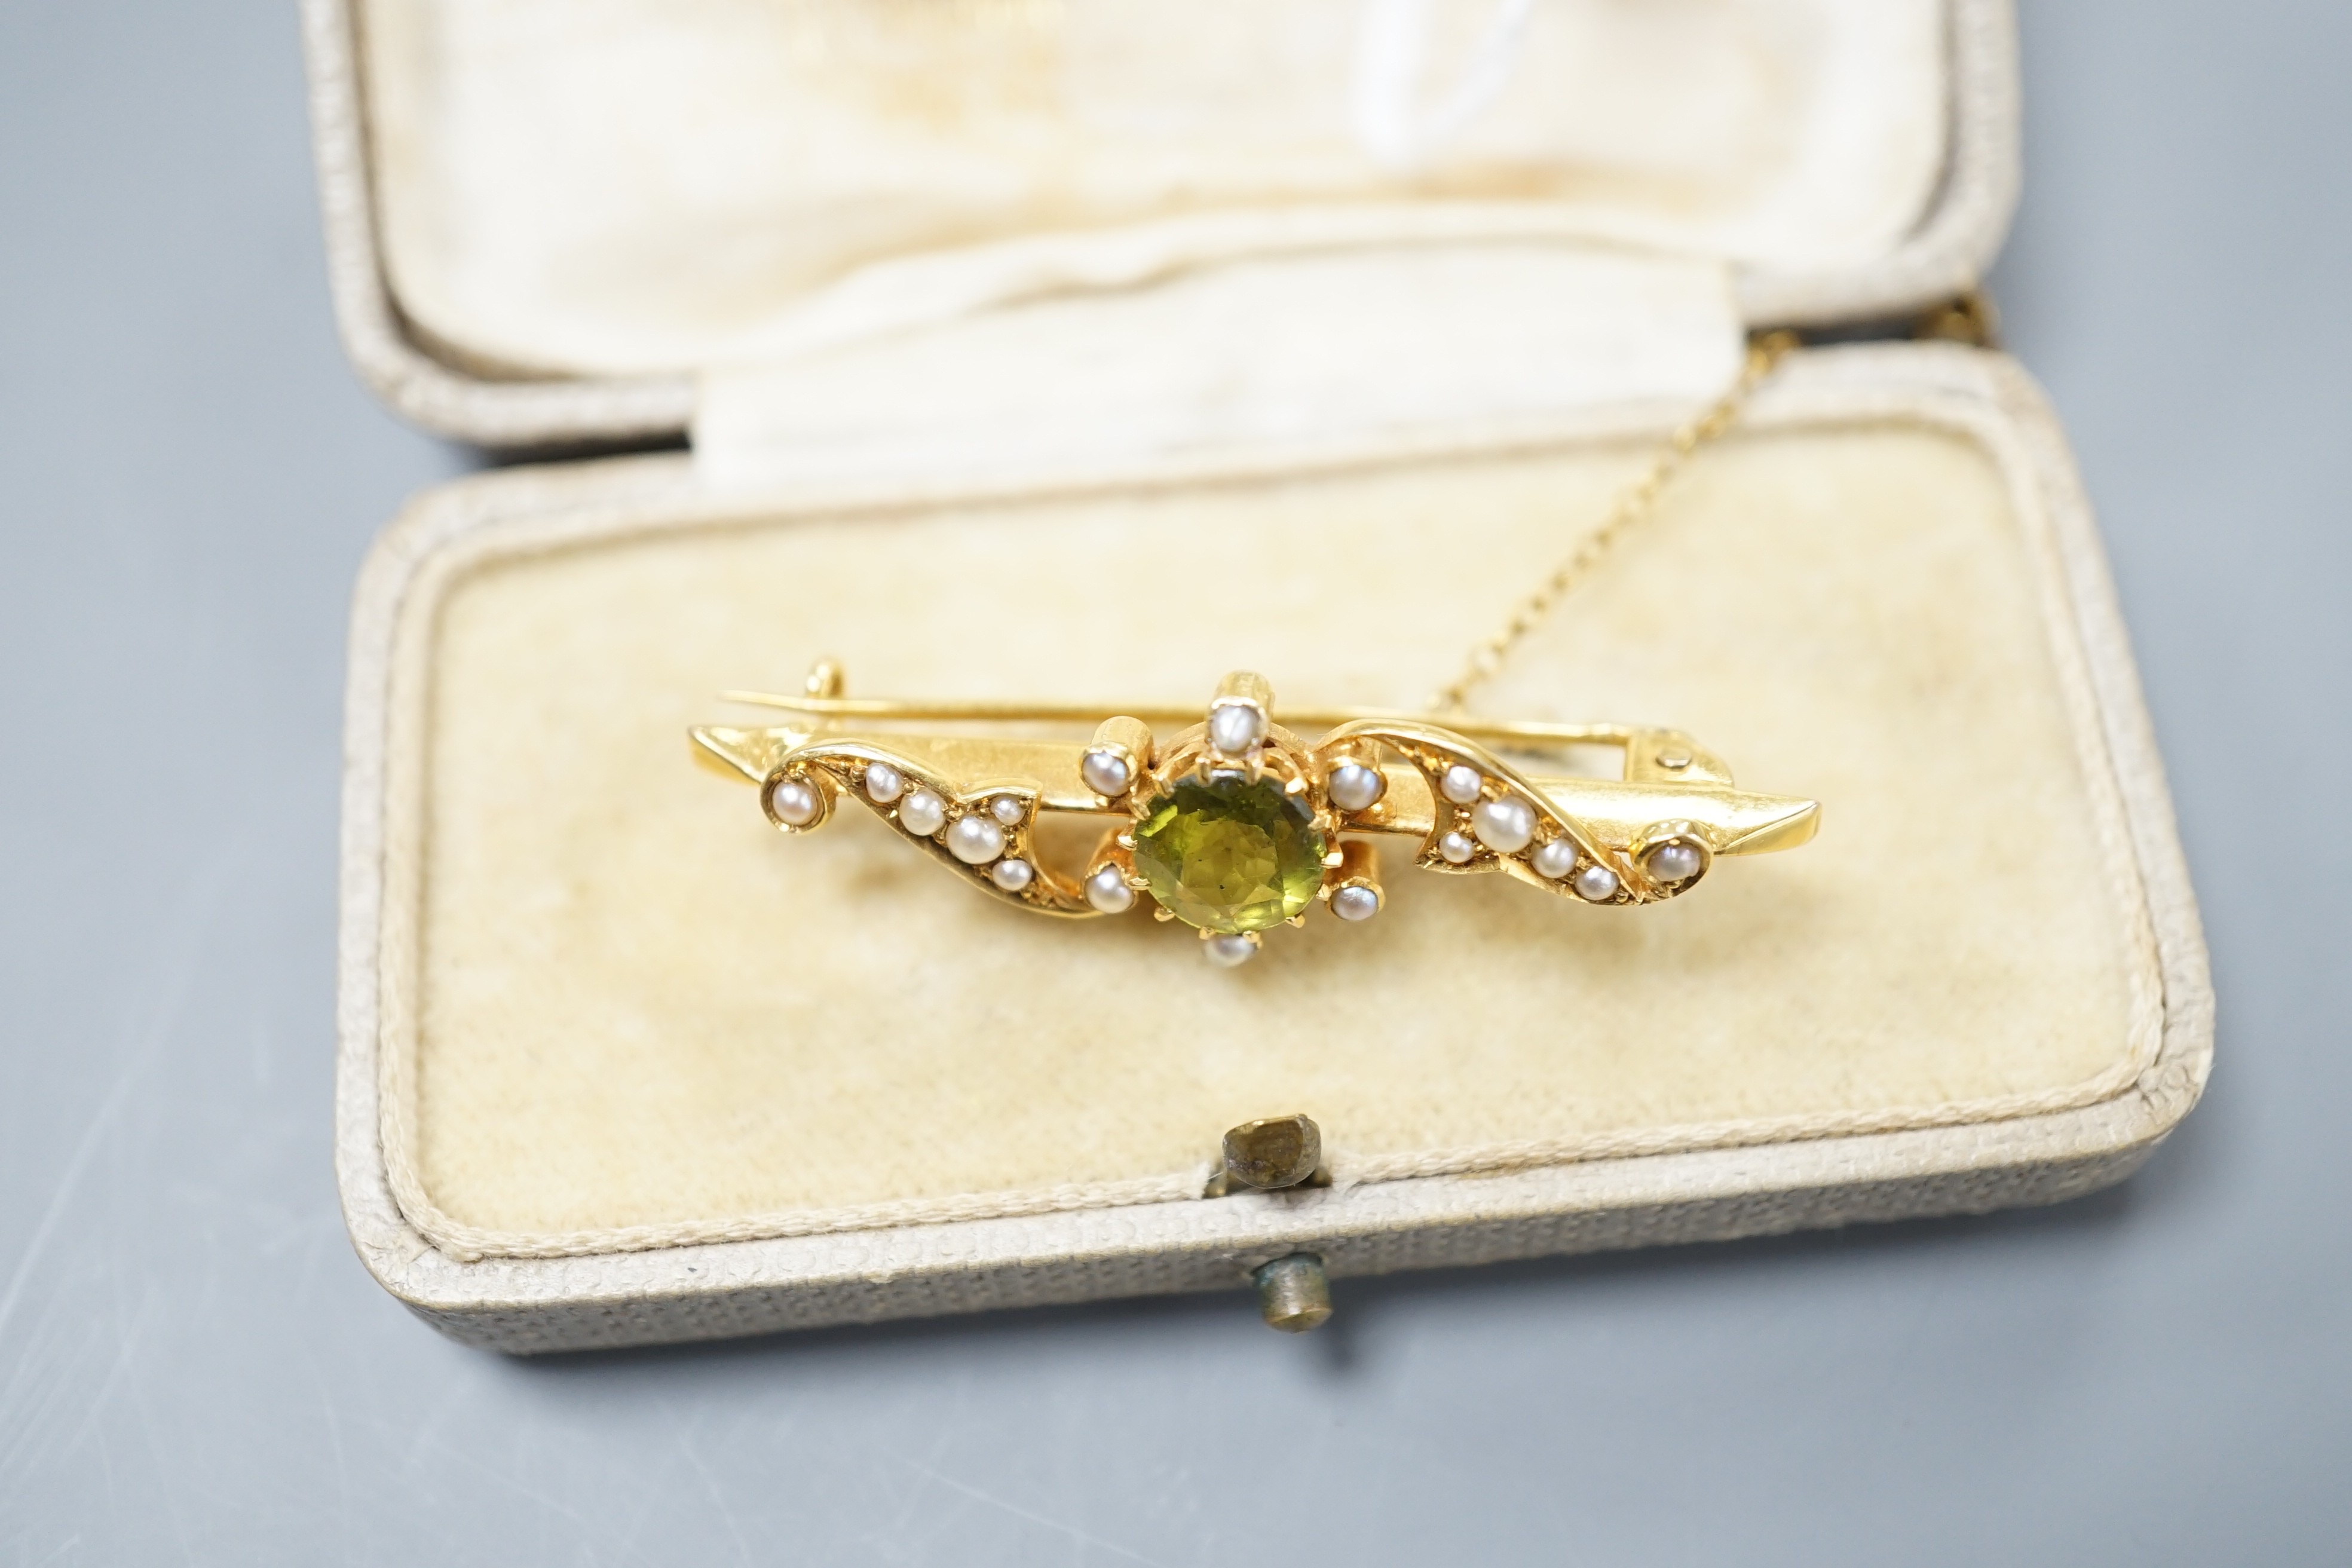 An Edwardian 15ct, peridot and seed pearl set bar brooch, 43mm, gross weight 4.2 grams.